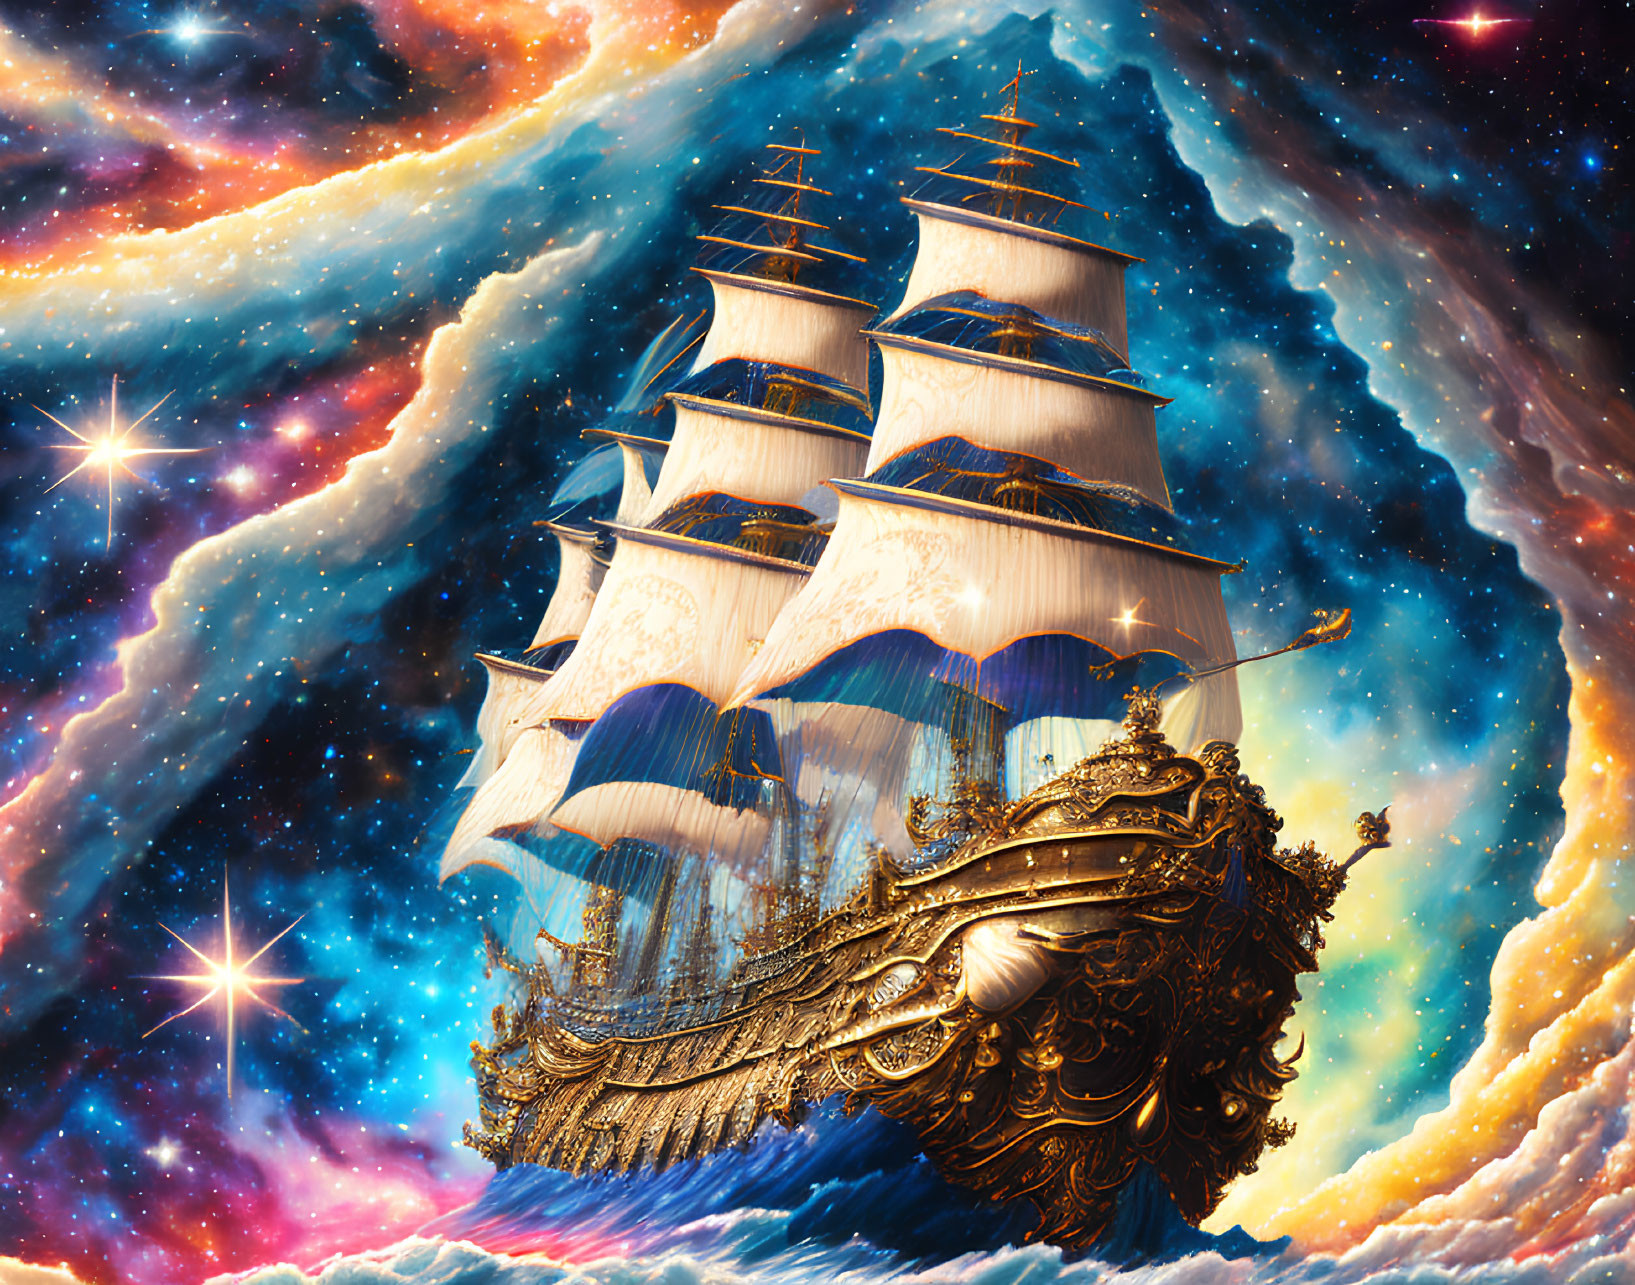 Golden ship sailing through cosmic sea with nebulae and stars.